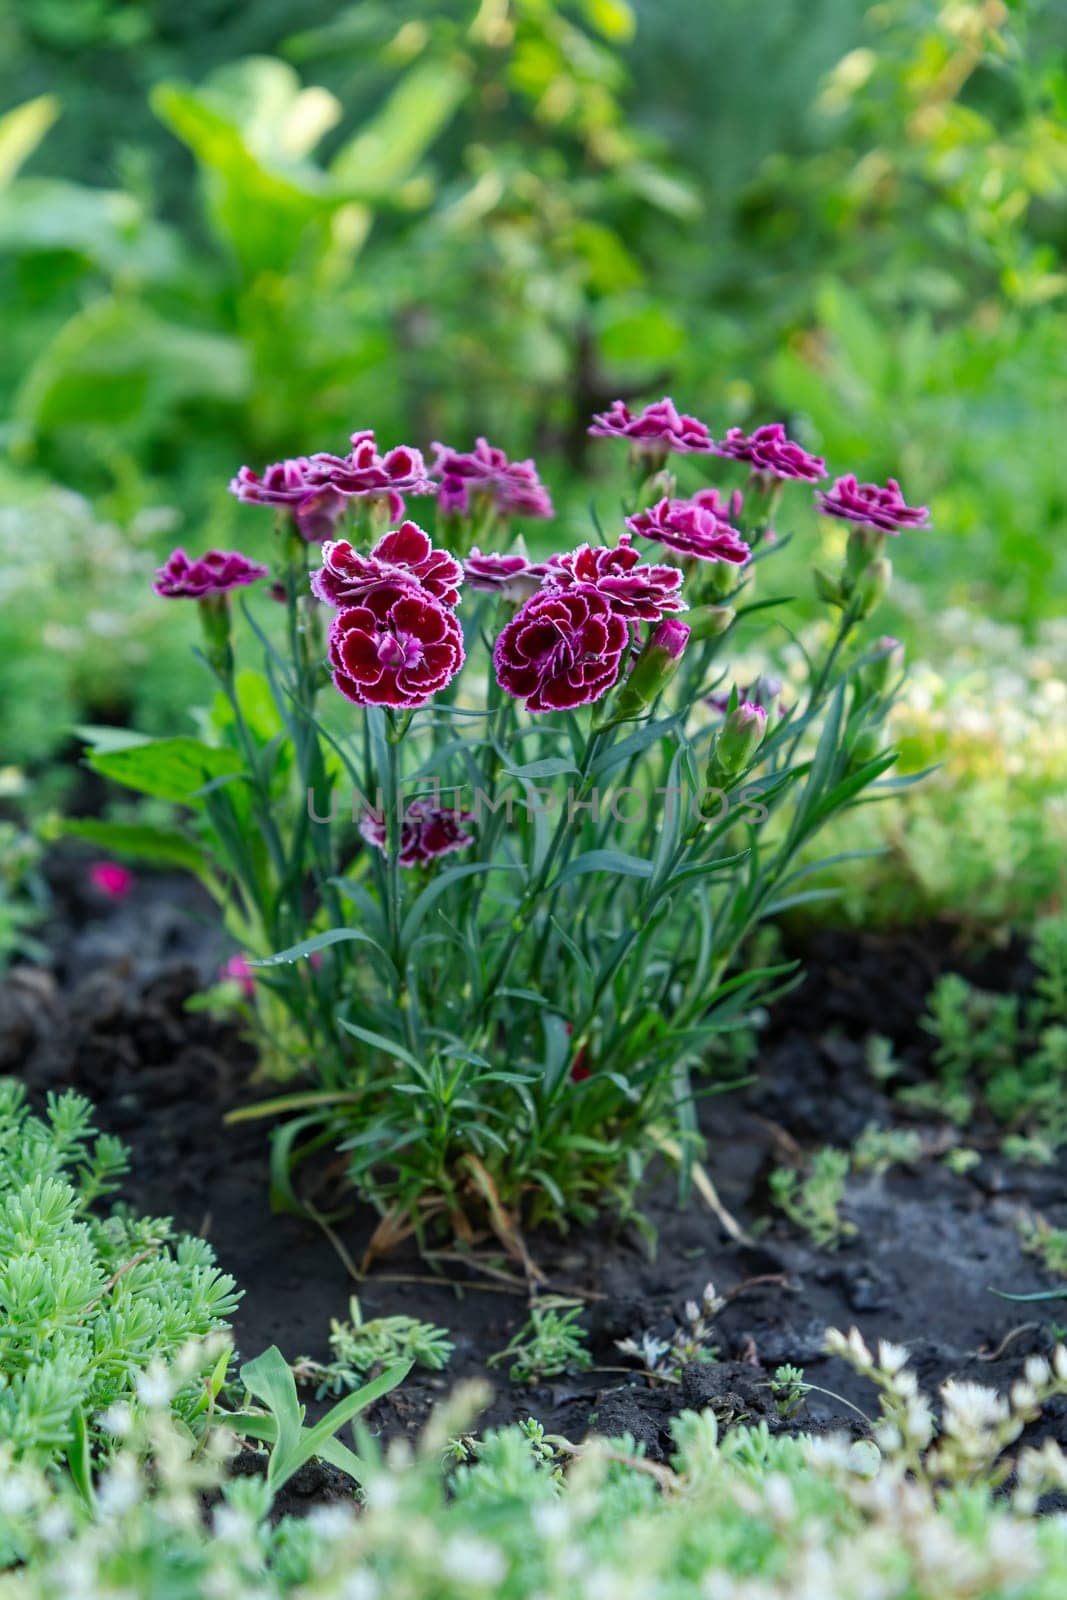 Red carnation growing on a garden bed. Flower bed organization.